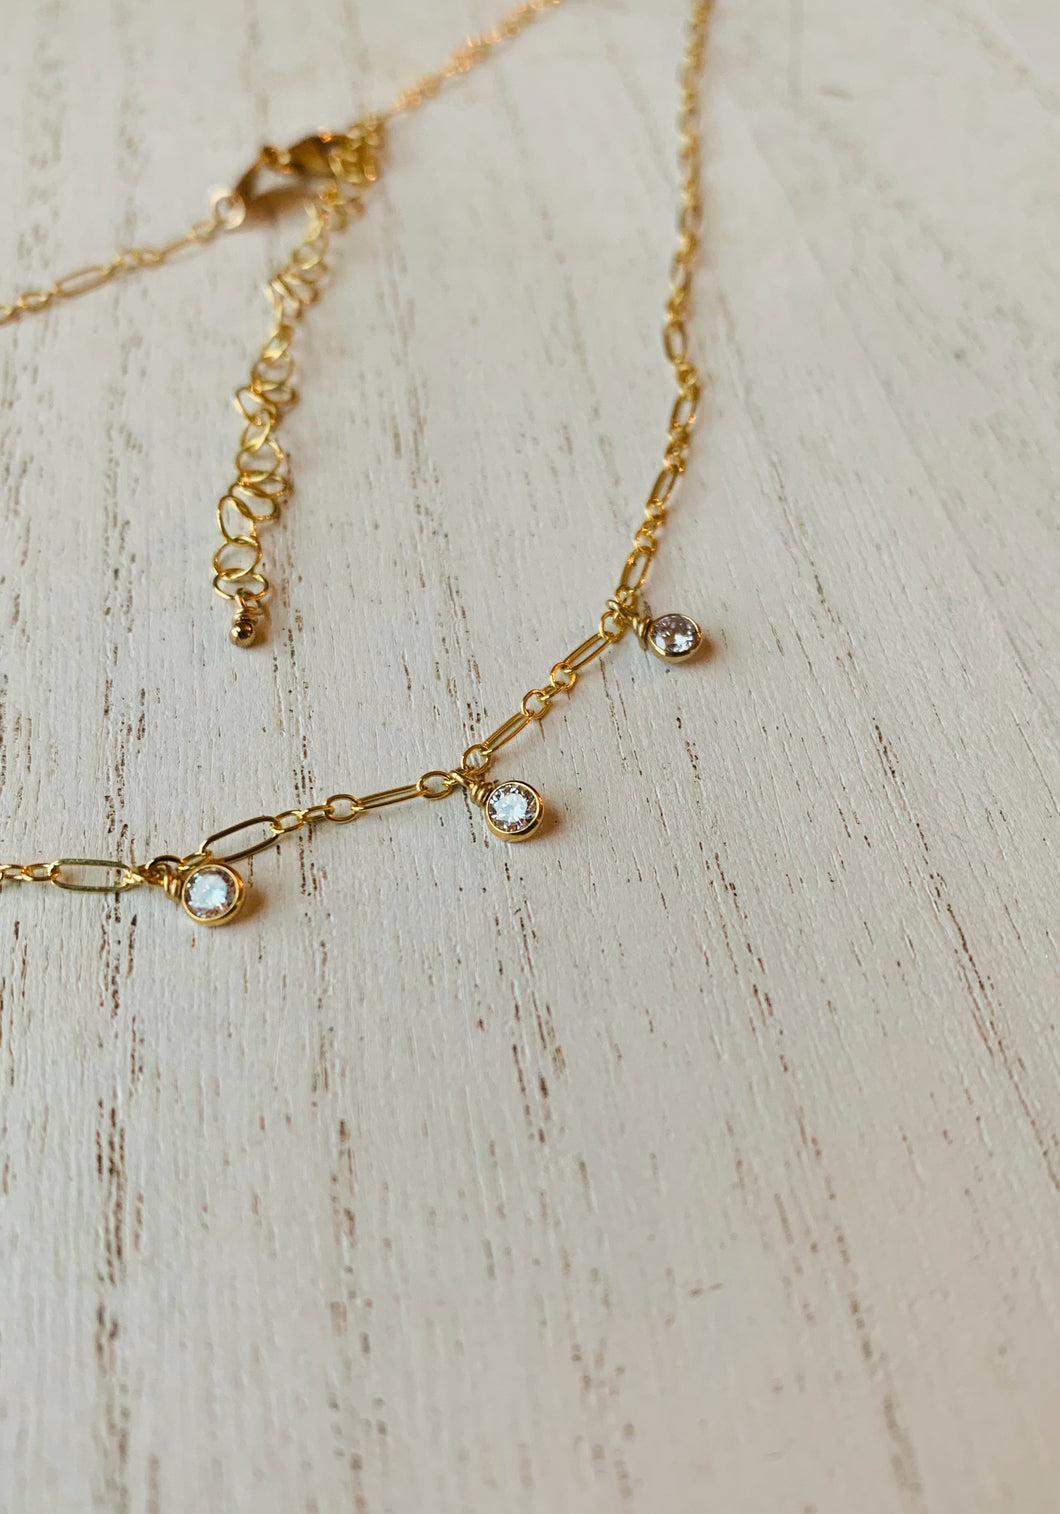 14k Gold Fill Three Sisters Necklace with Three Dangling CZ dangles. Adjustable Length extender tail.